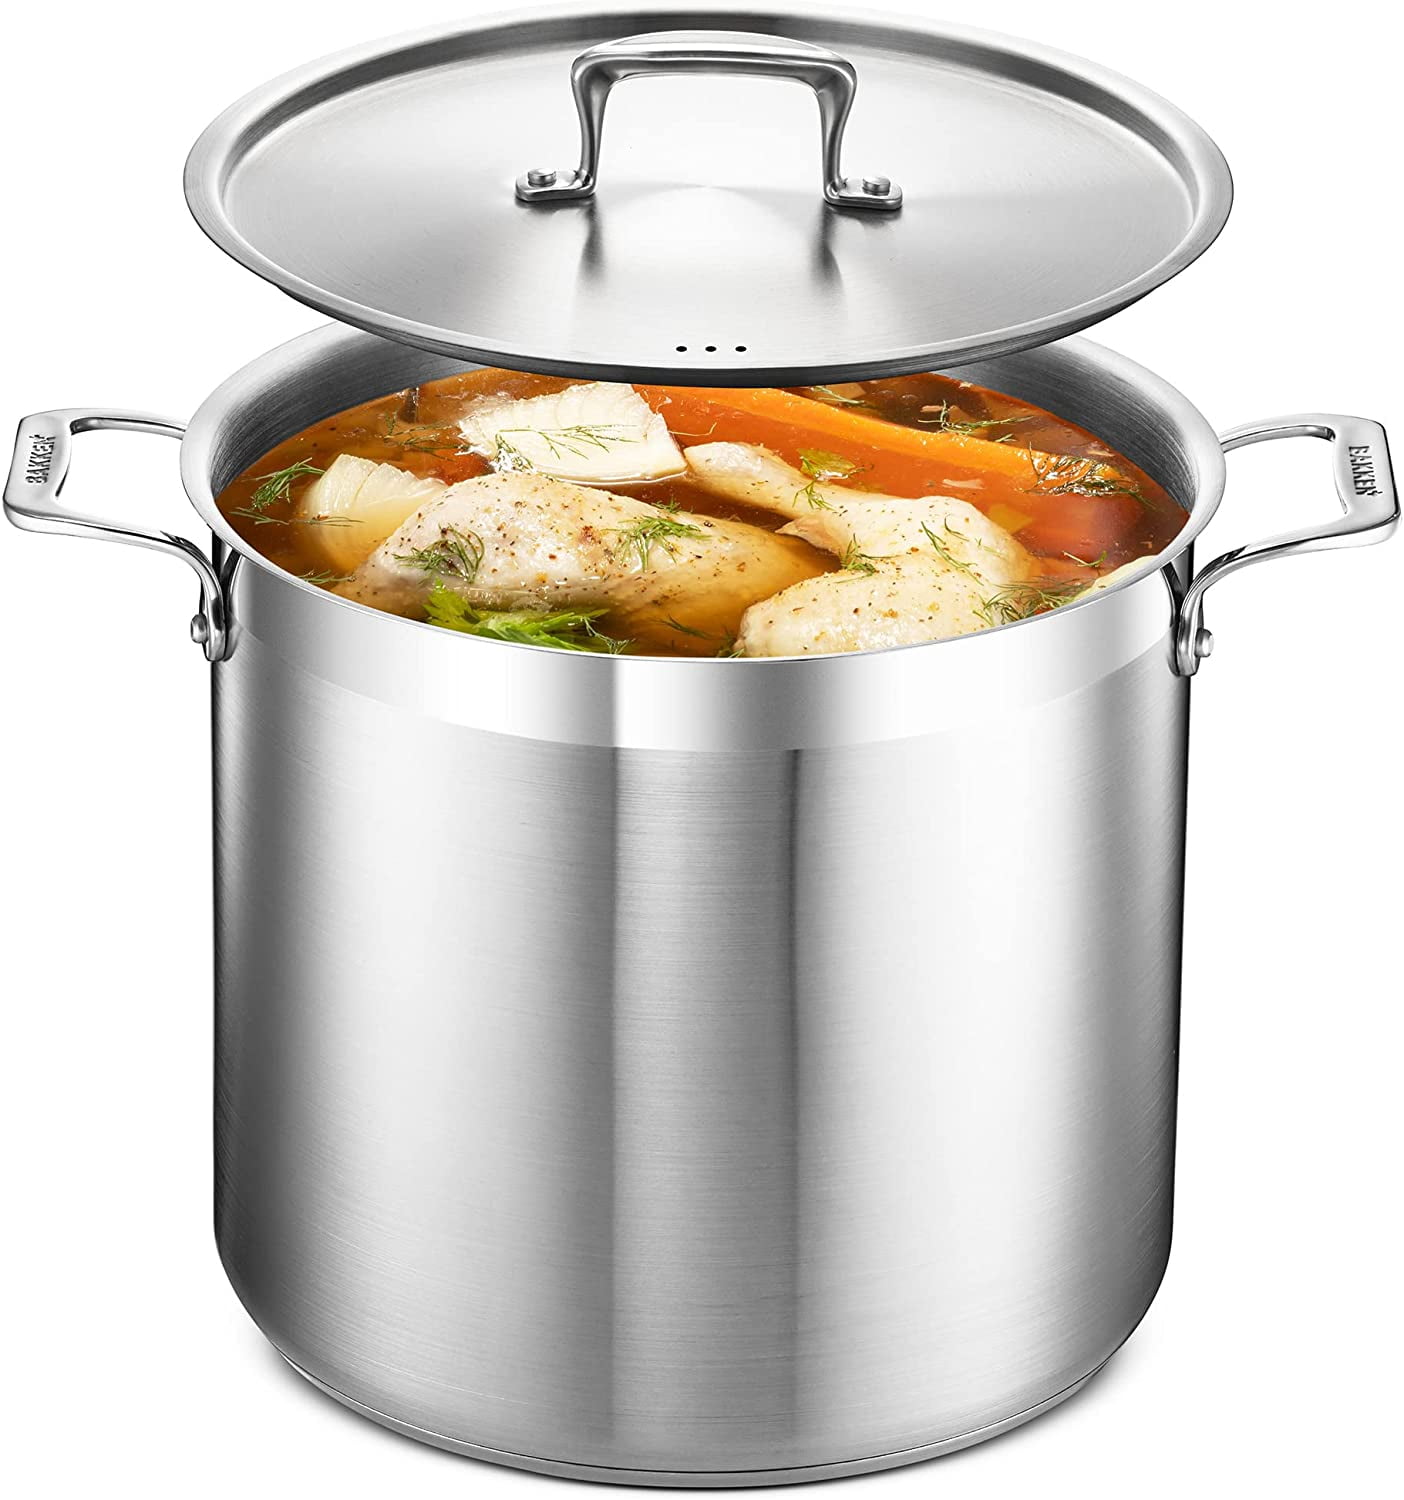 BAERFO 2 Qt Induction Stockpot | 5-Ply 18/8 Stainless Steel Cooking Stock  Pot with Lid | Heavy Duty pots for Soup, Broth, Chili, Casserole, Stew